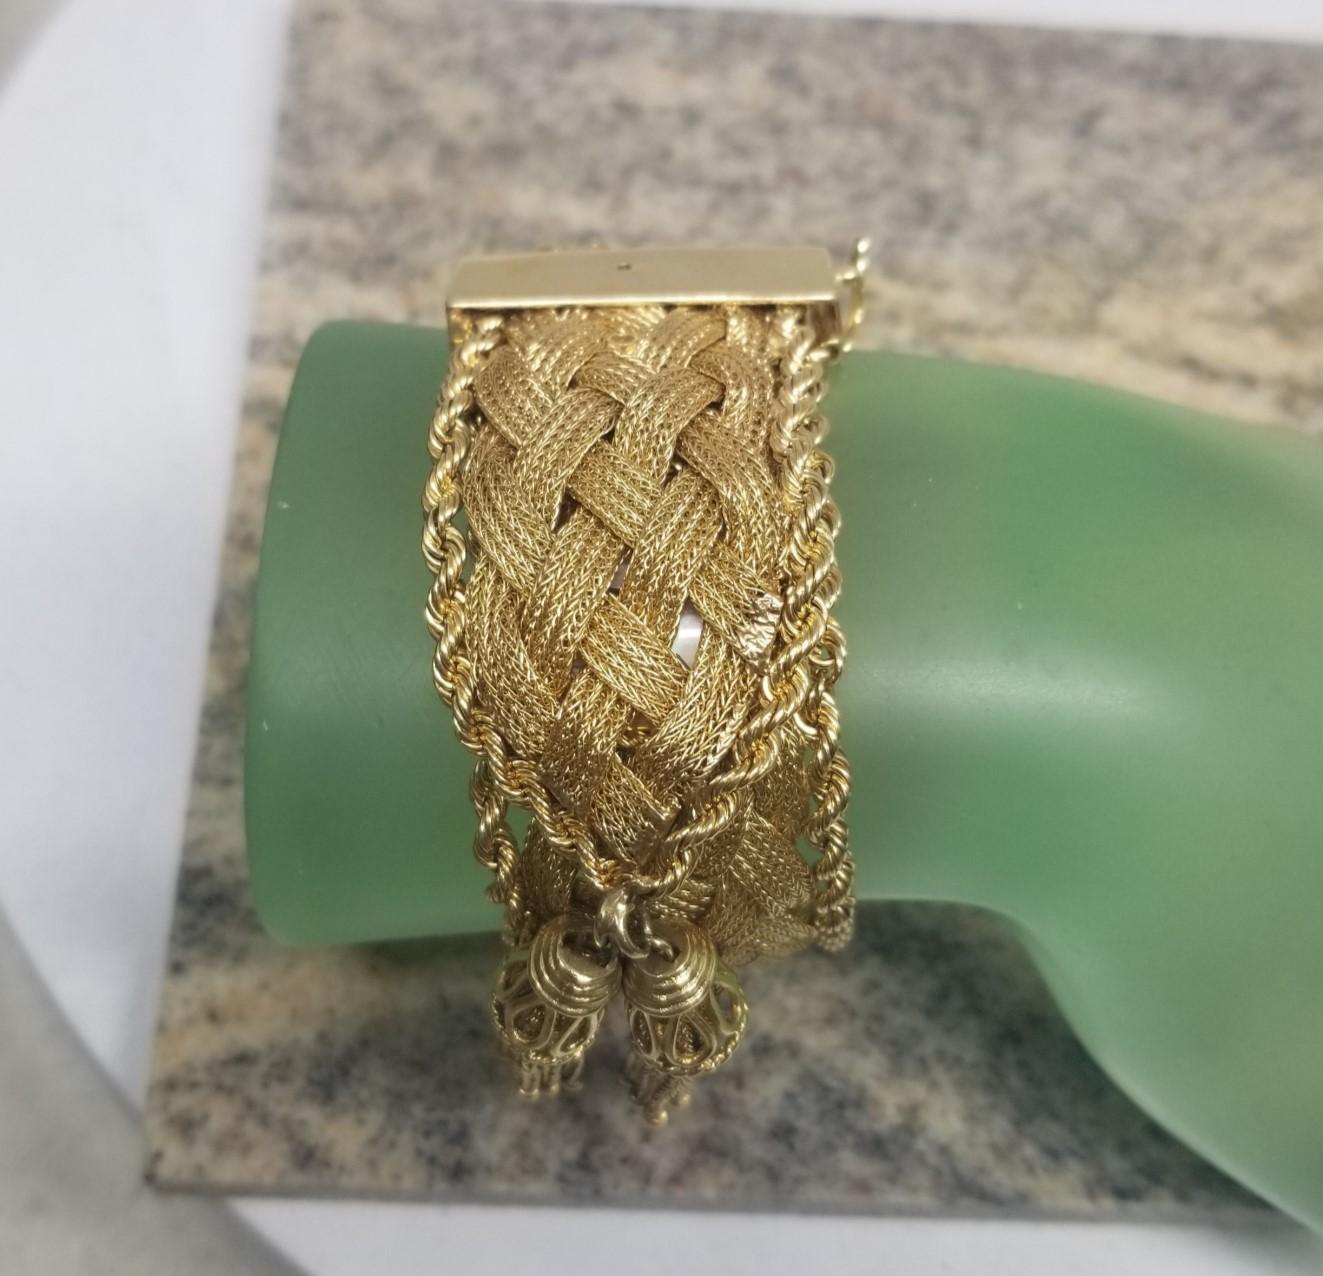 Vintage Geneve 14 Karat Yellow Gold Woven and Rope Bracelet Watch with Tassels 5